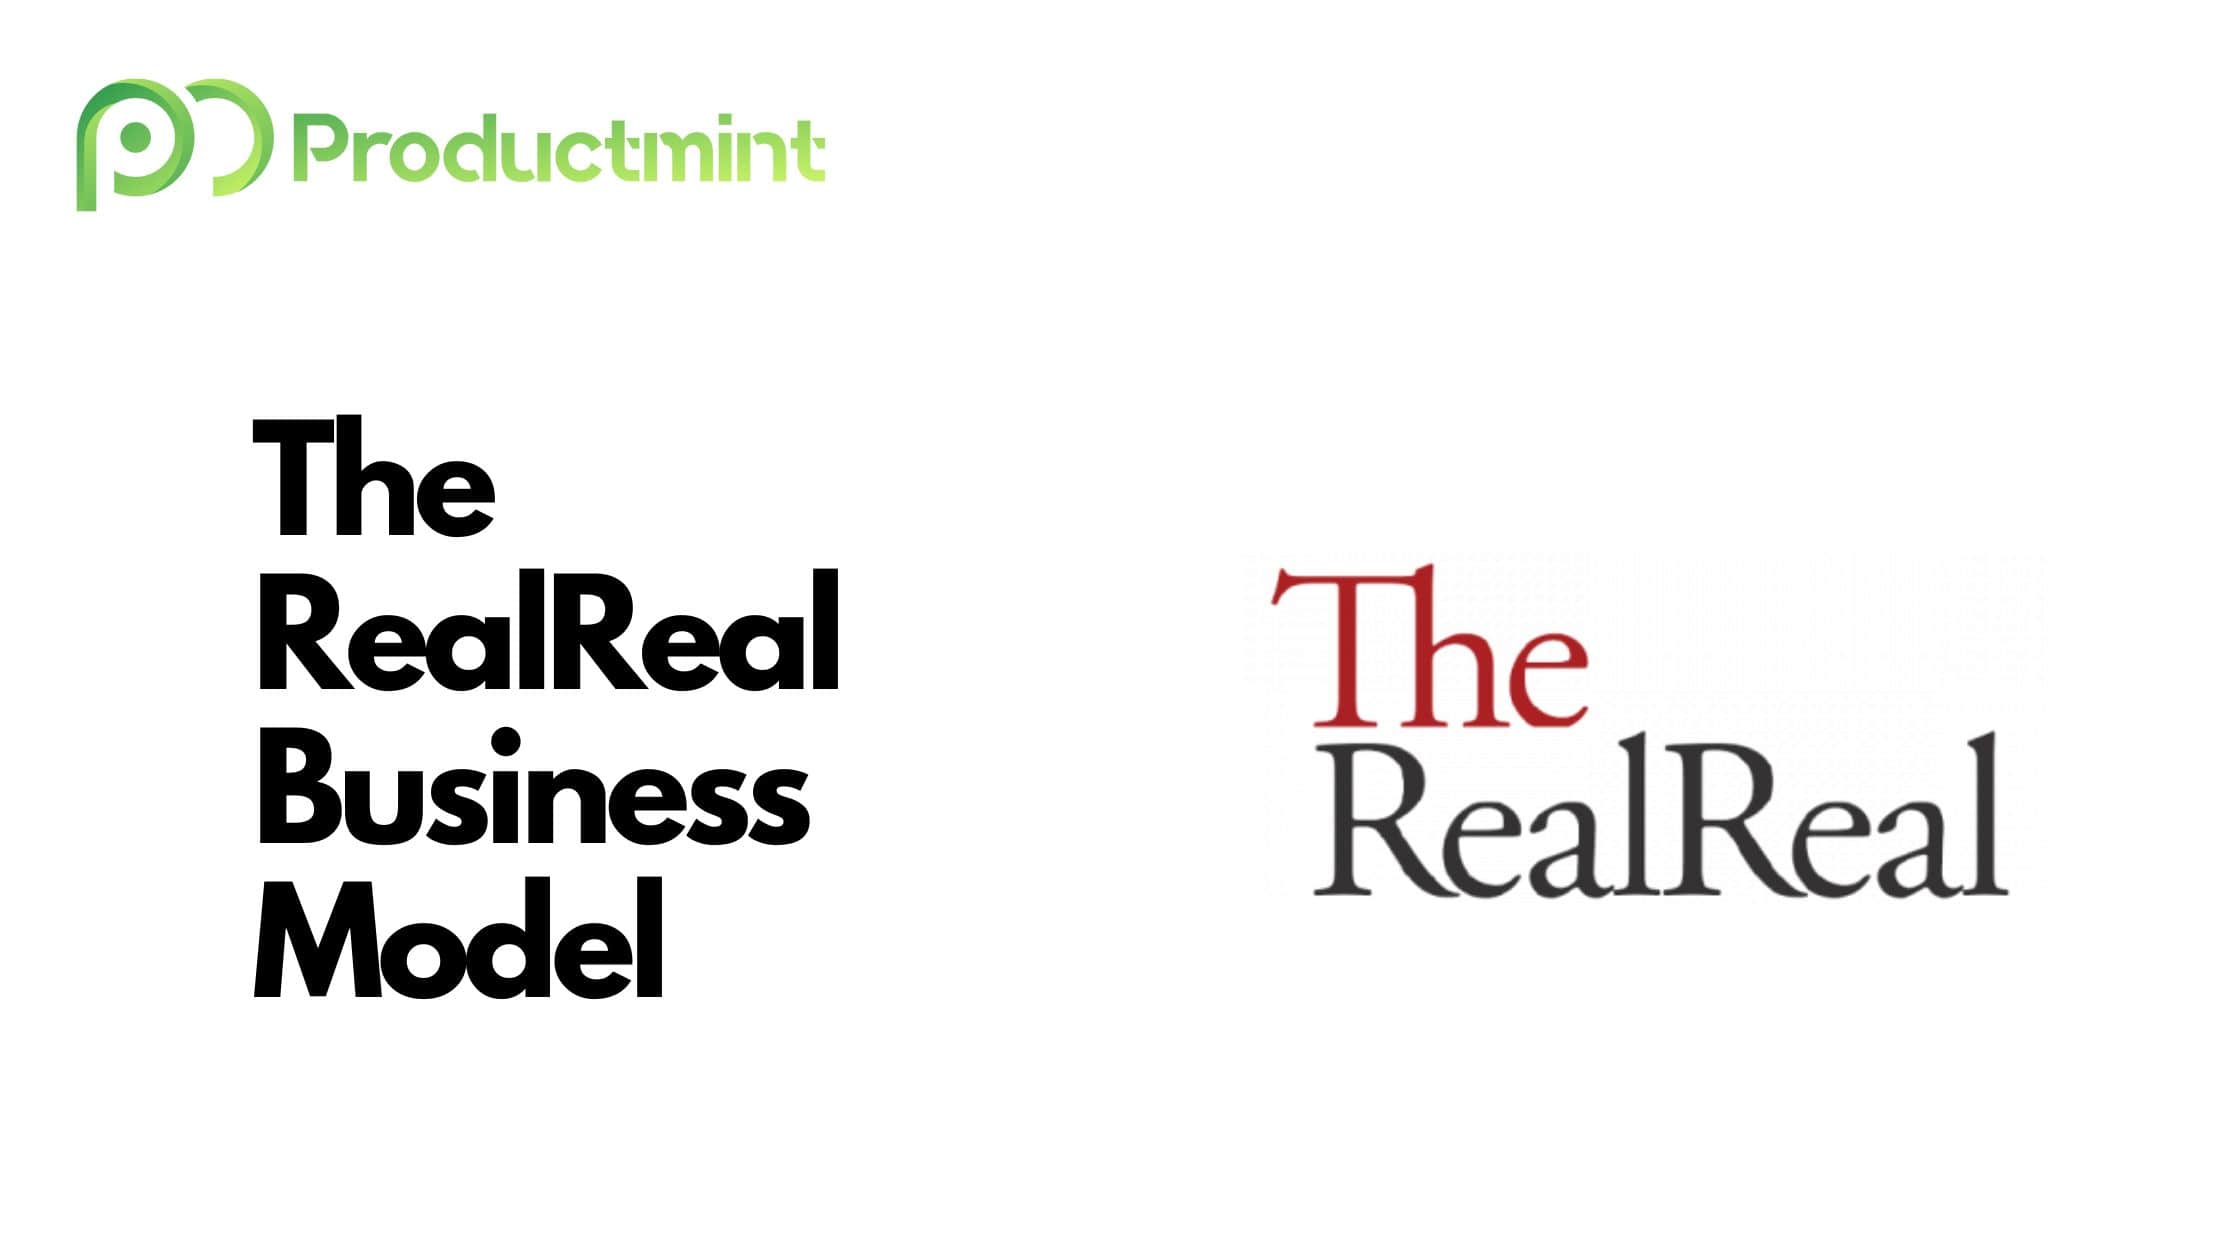 The RealReal Business Model